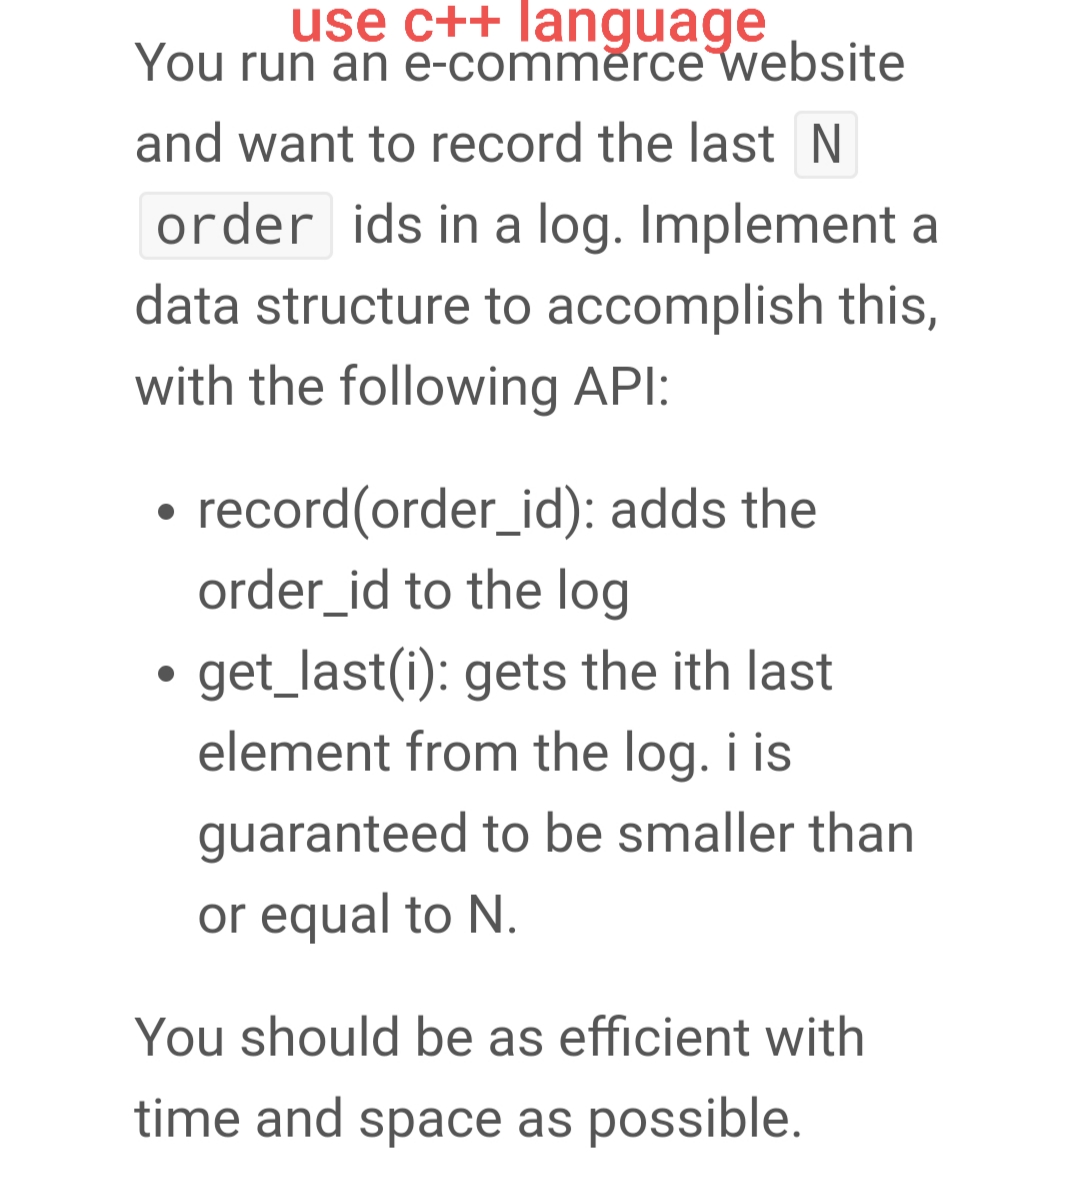 use c++ language
You run an e-comměrce website
and want to record the last N
order ids in a log. Implement a
data structure to accomplish this,
with the following API:
record(order_id): adds the
order_id to the log
get_last(i): gets the ith last
element from the log. i is
guaranteed to be smaller than
or equal to N.
You should be as efficient with
time and space as possible.
